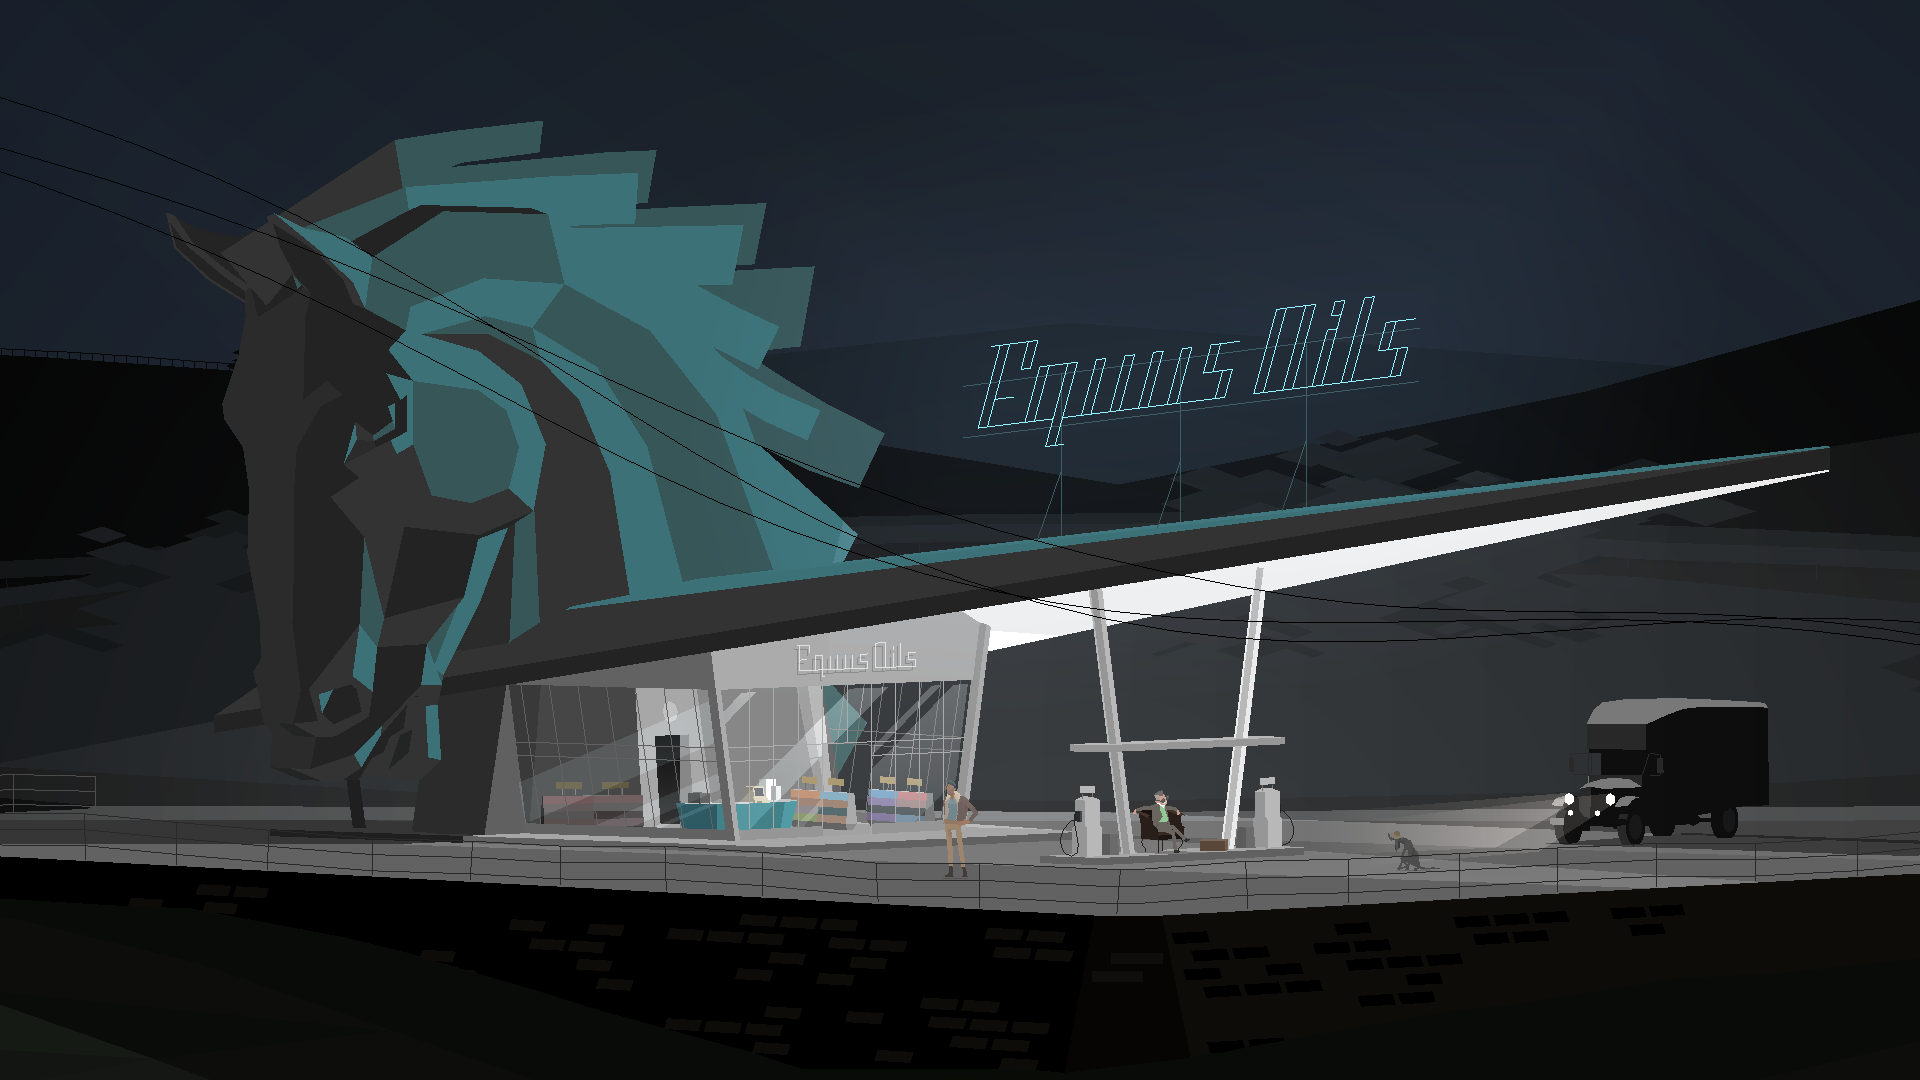 An Equis Oils gas station at night. There are a few people around and the left side of the station has a huge teal horse head on it.